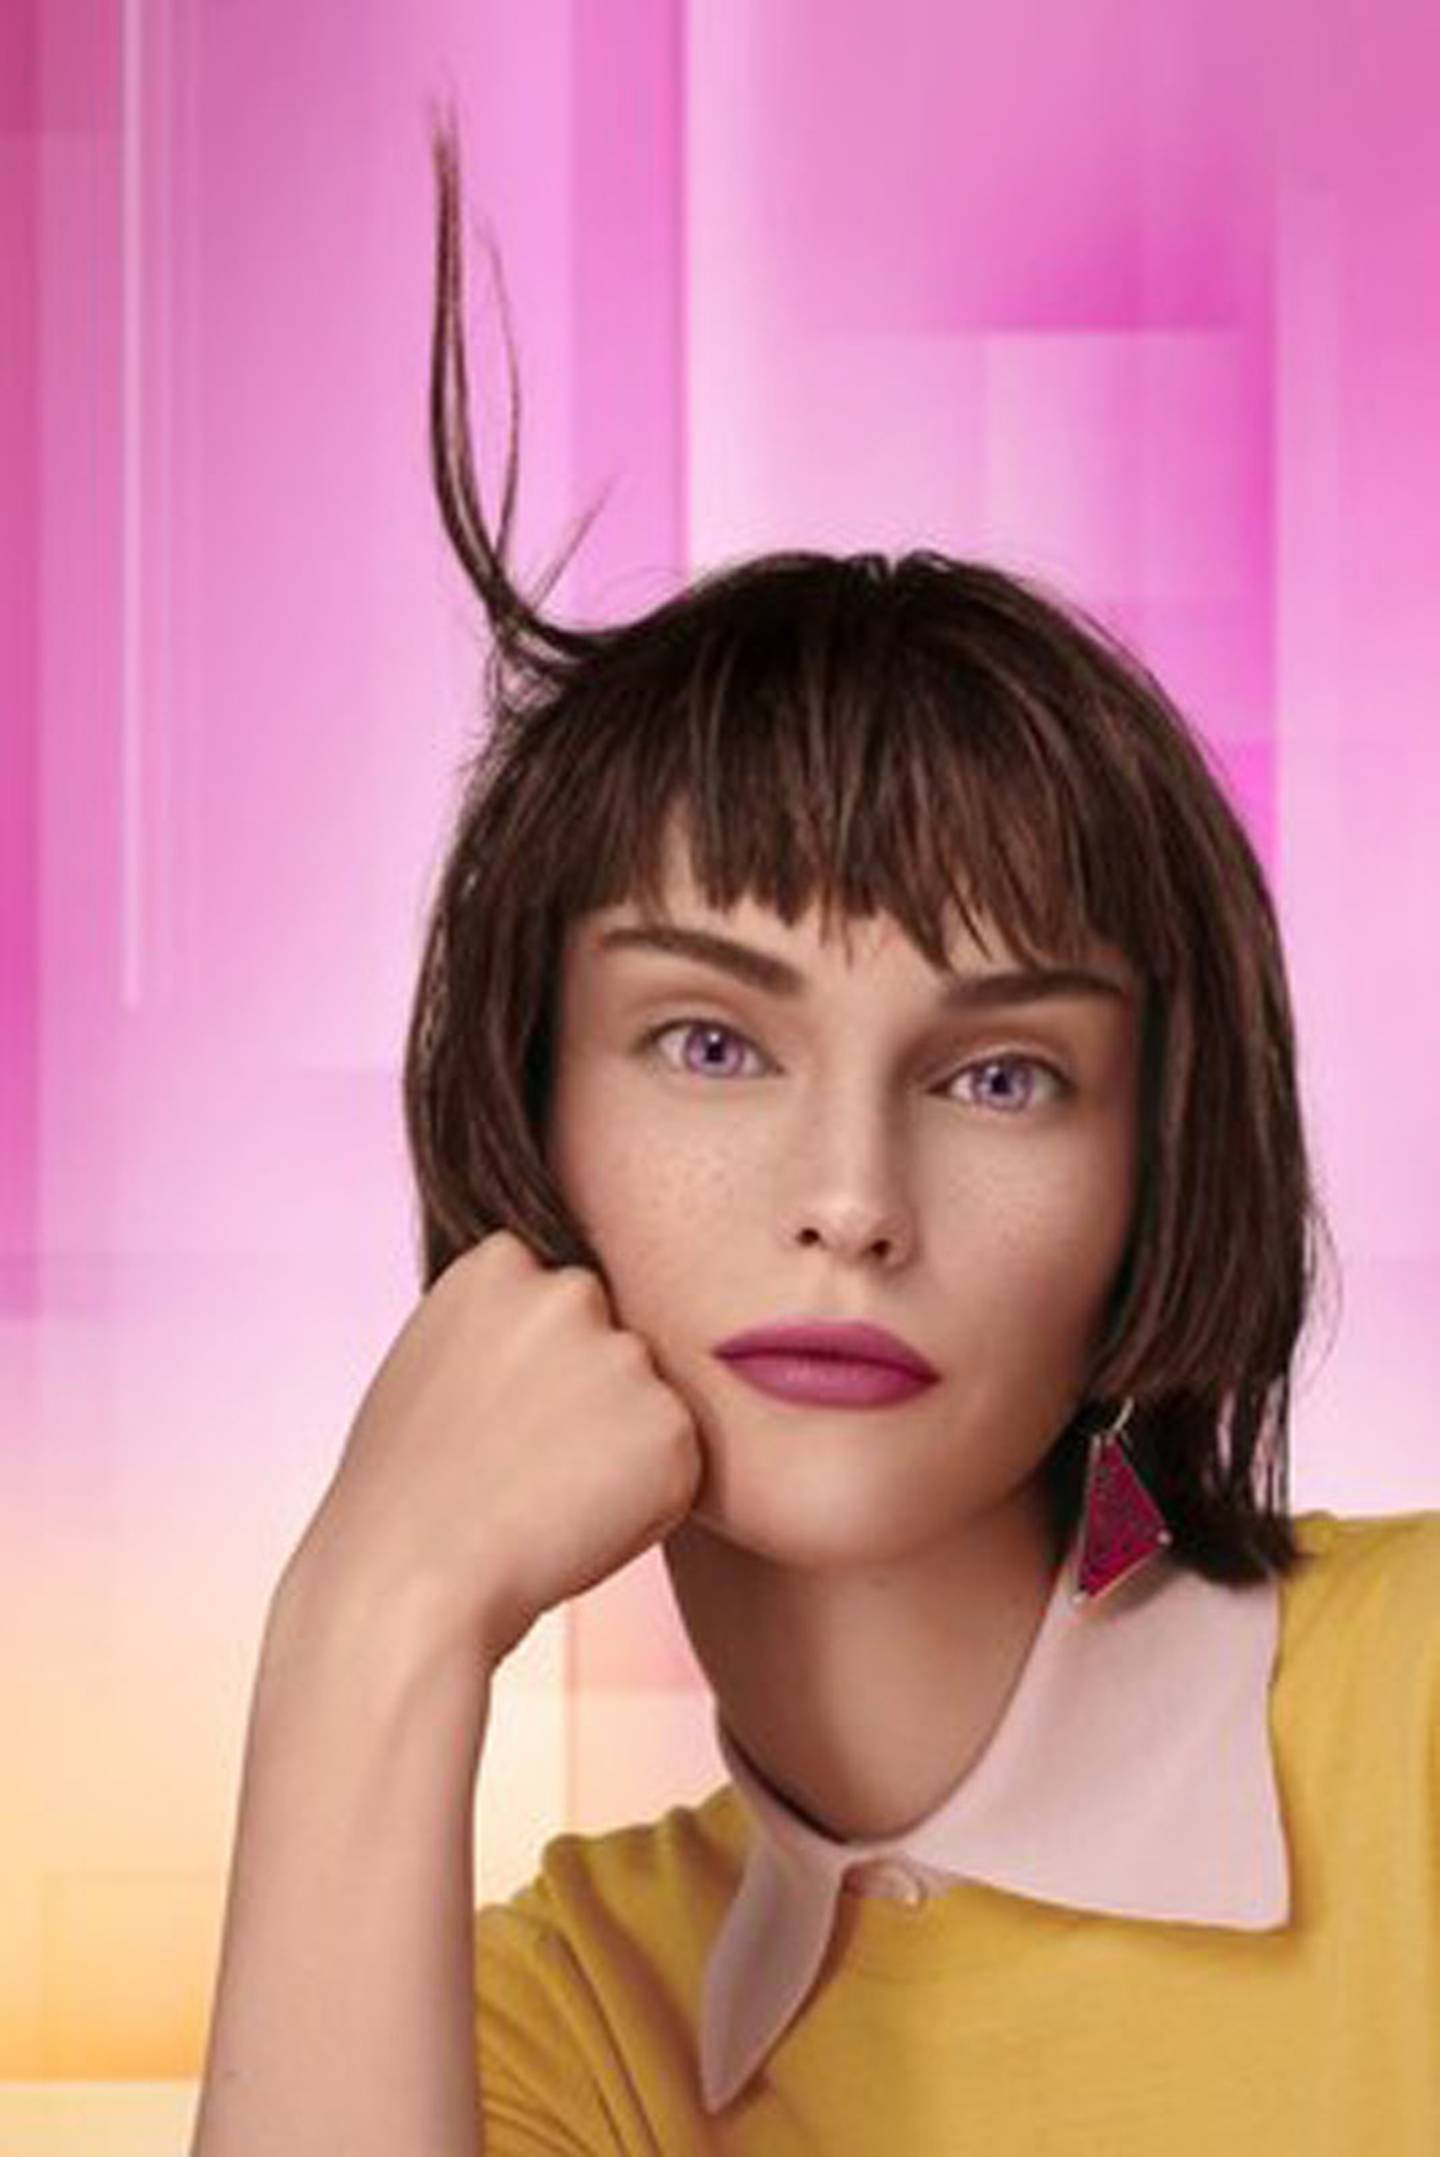 A virtual model with a shaggy bob haircut and bangs leans her head on her hand and looks straight at the viewer.